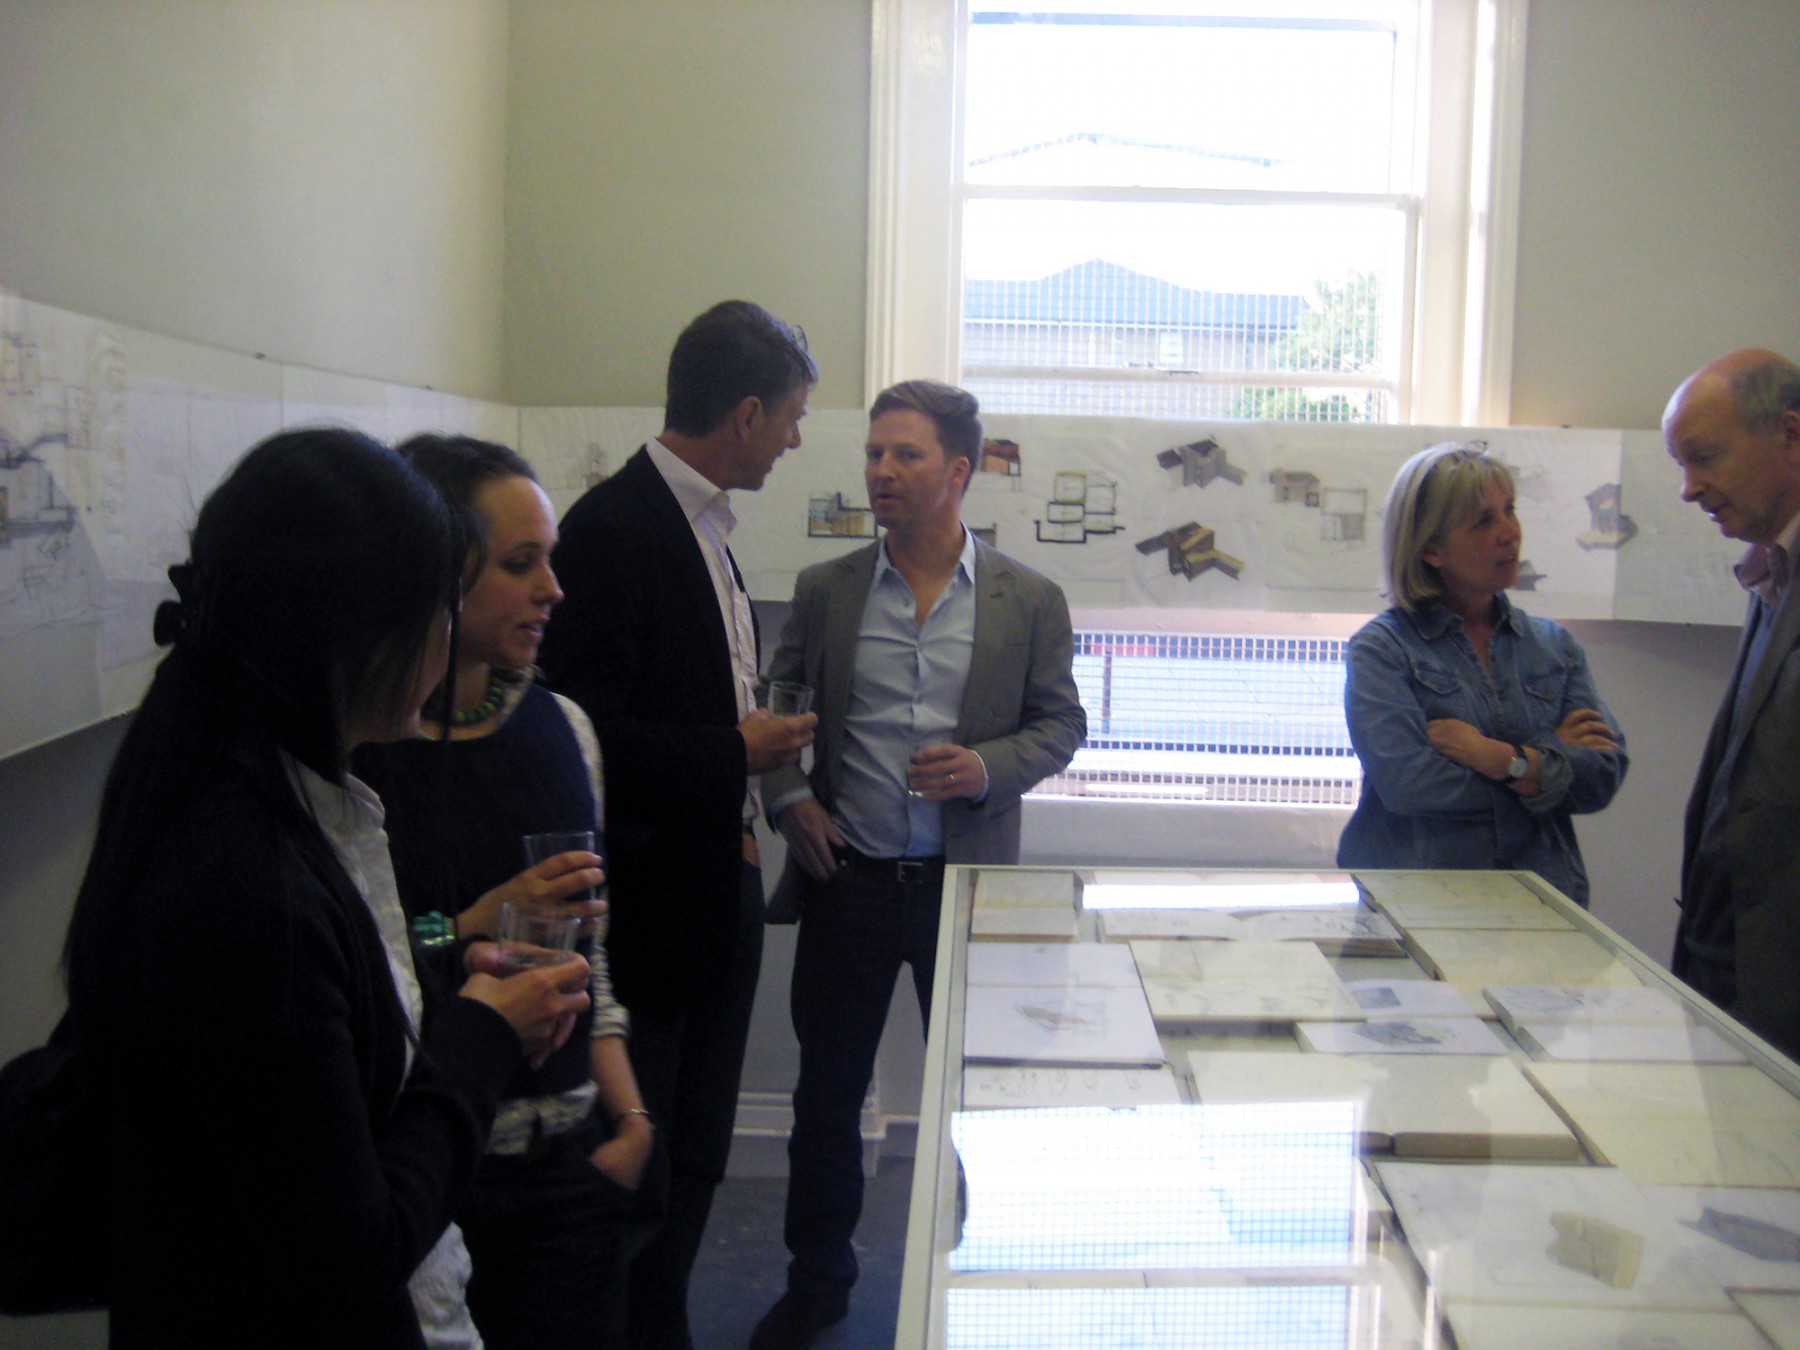 Jamie-Fobert-Architects-C4RD-Exhibition-Architecture-Sketch-Books-sketches-opening 1